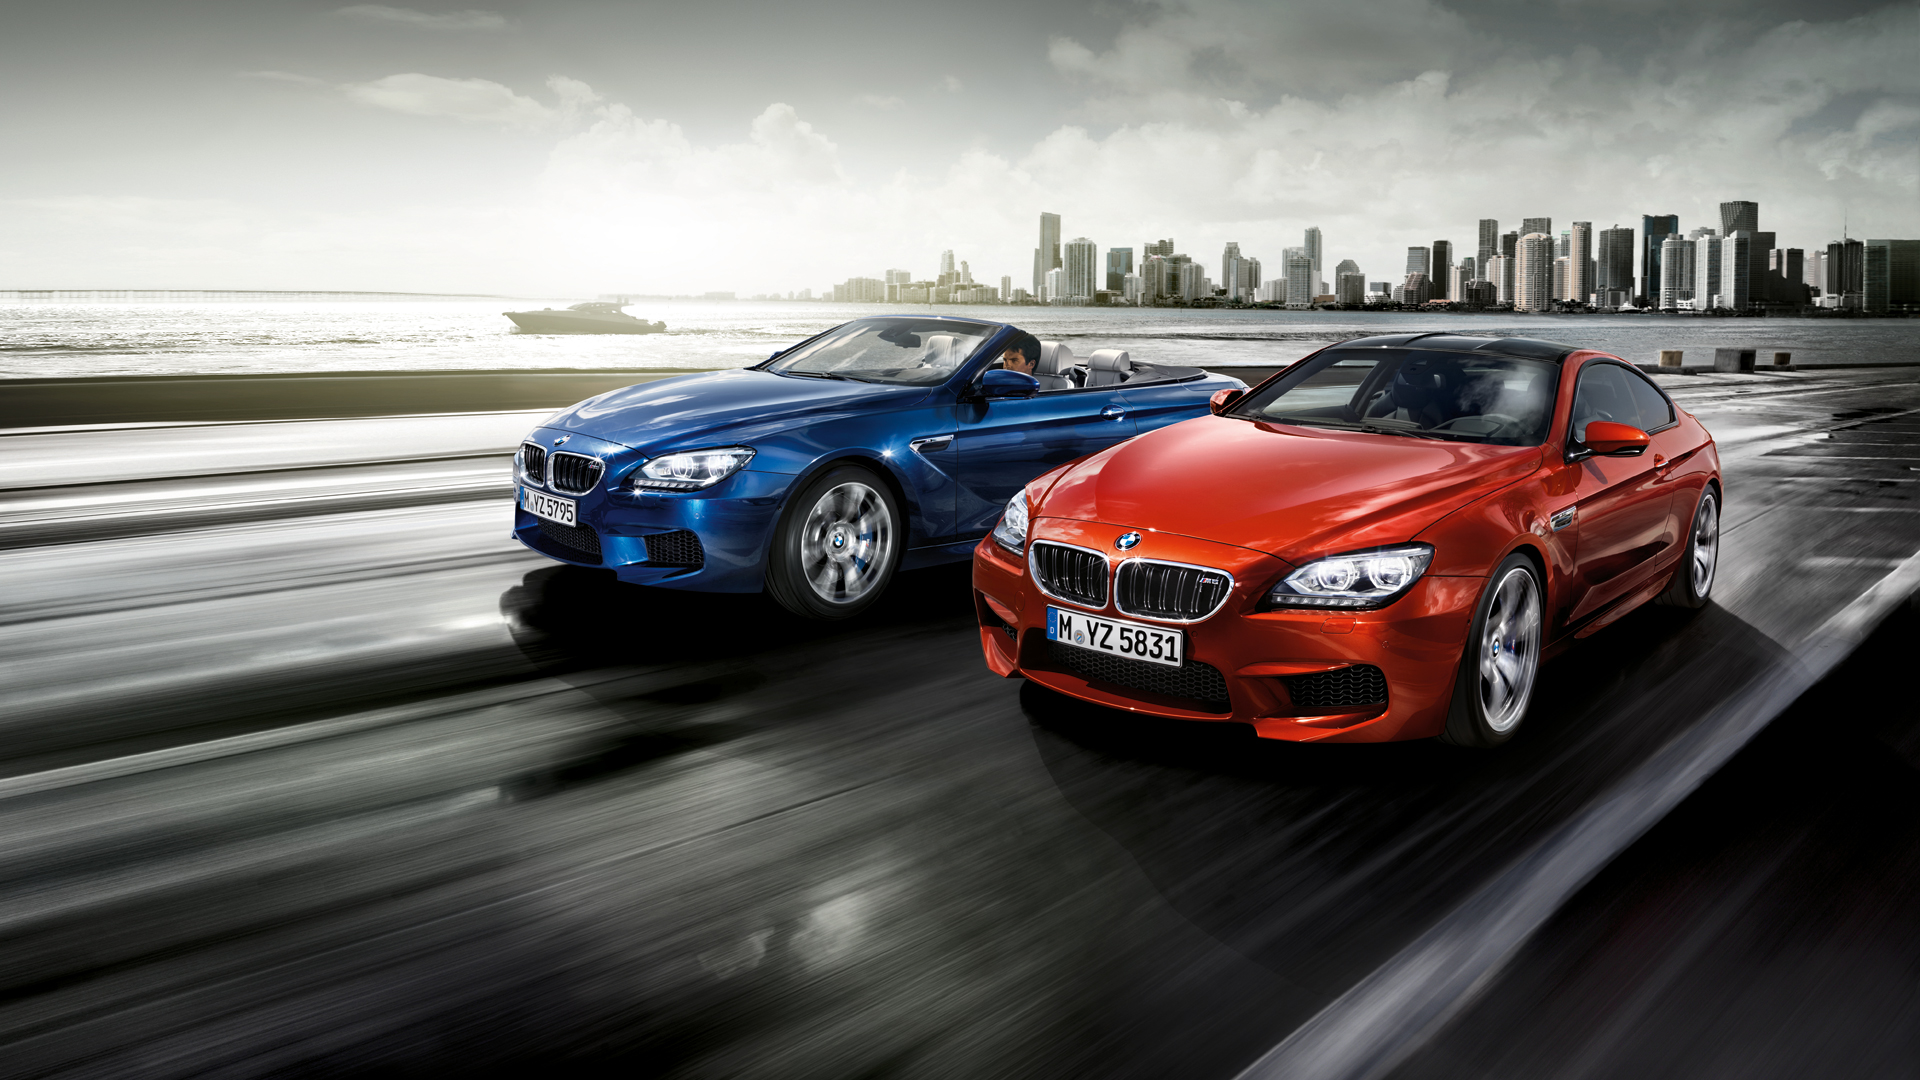 BMW M6 convertible image gallery 6 1920111